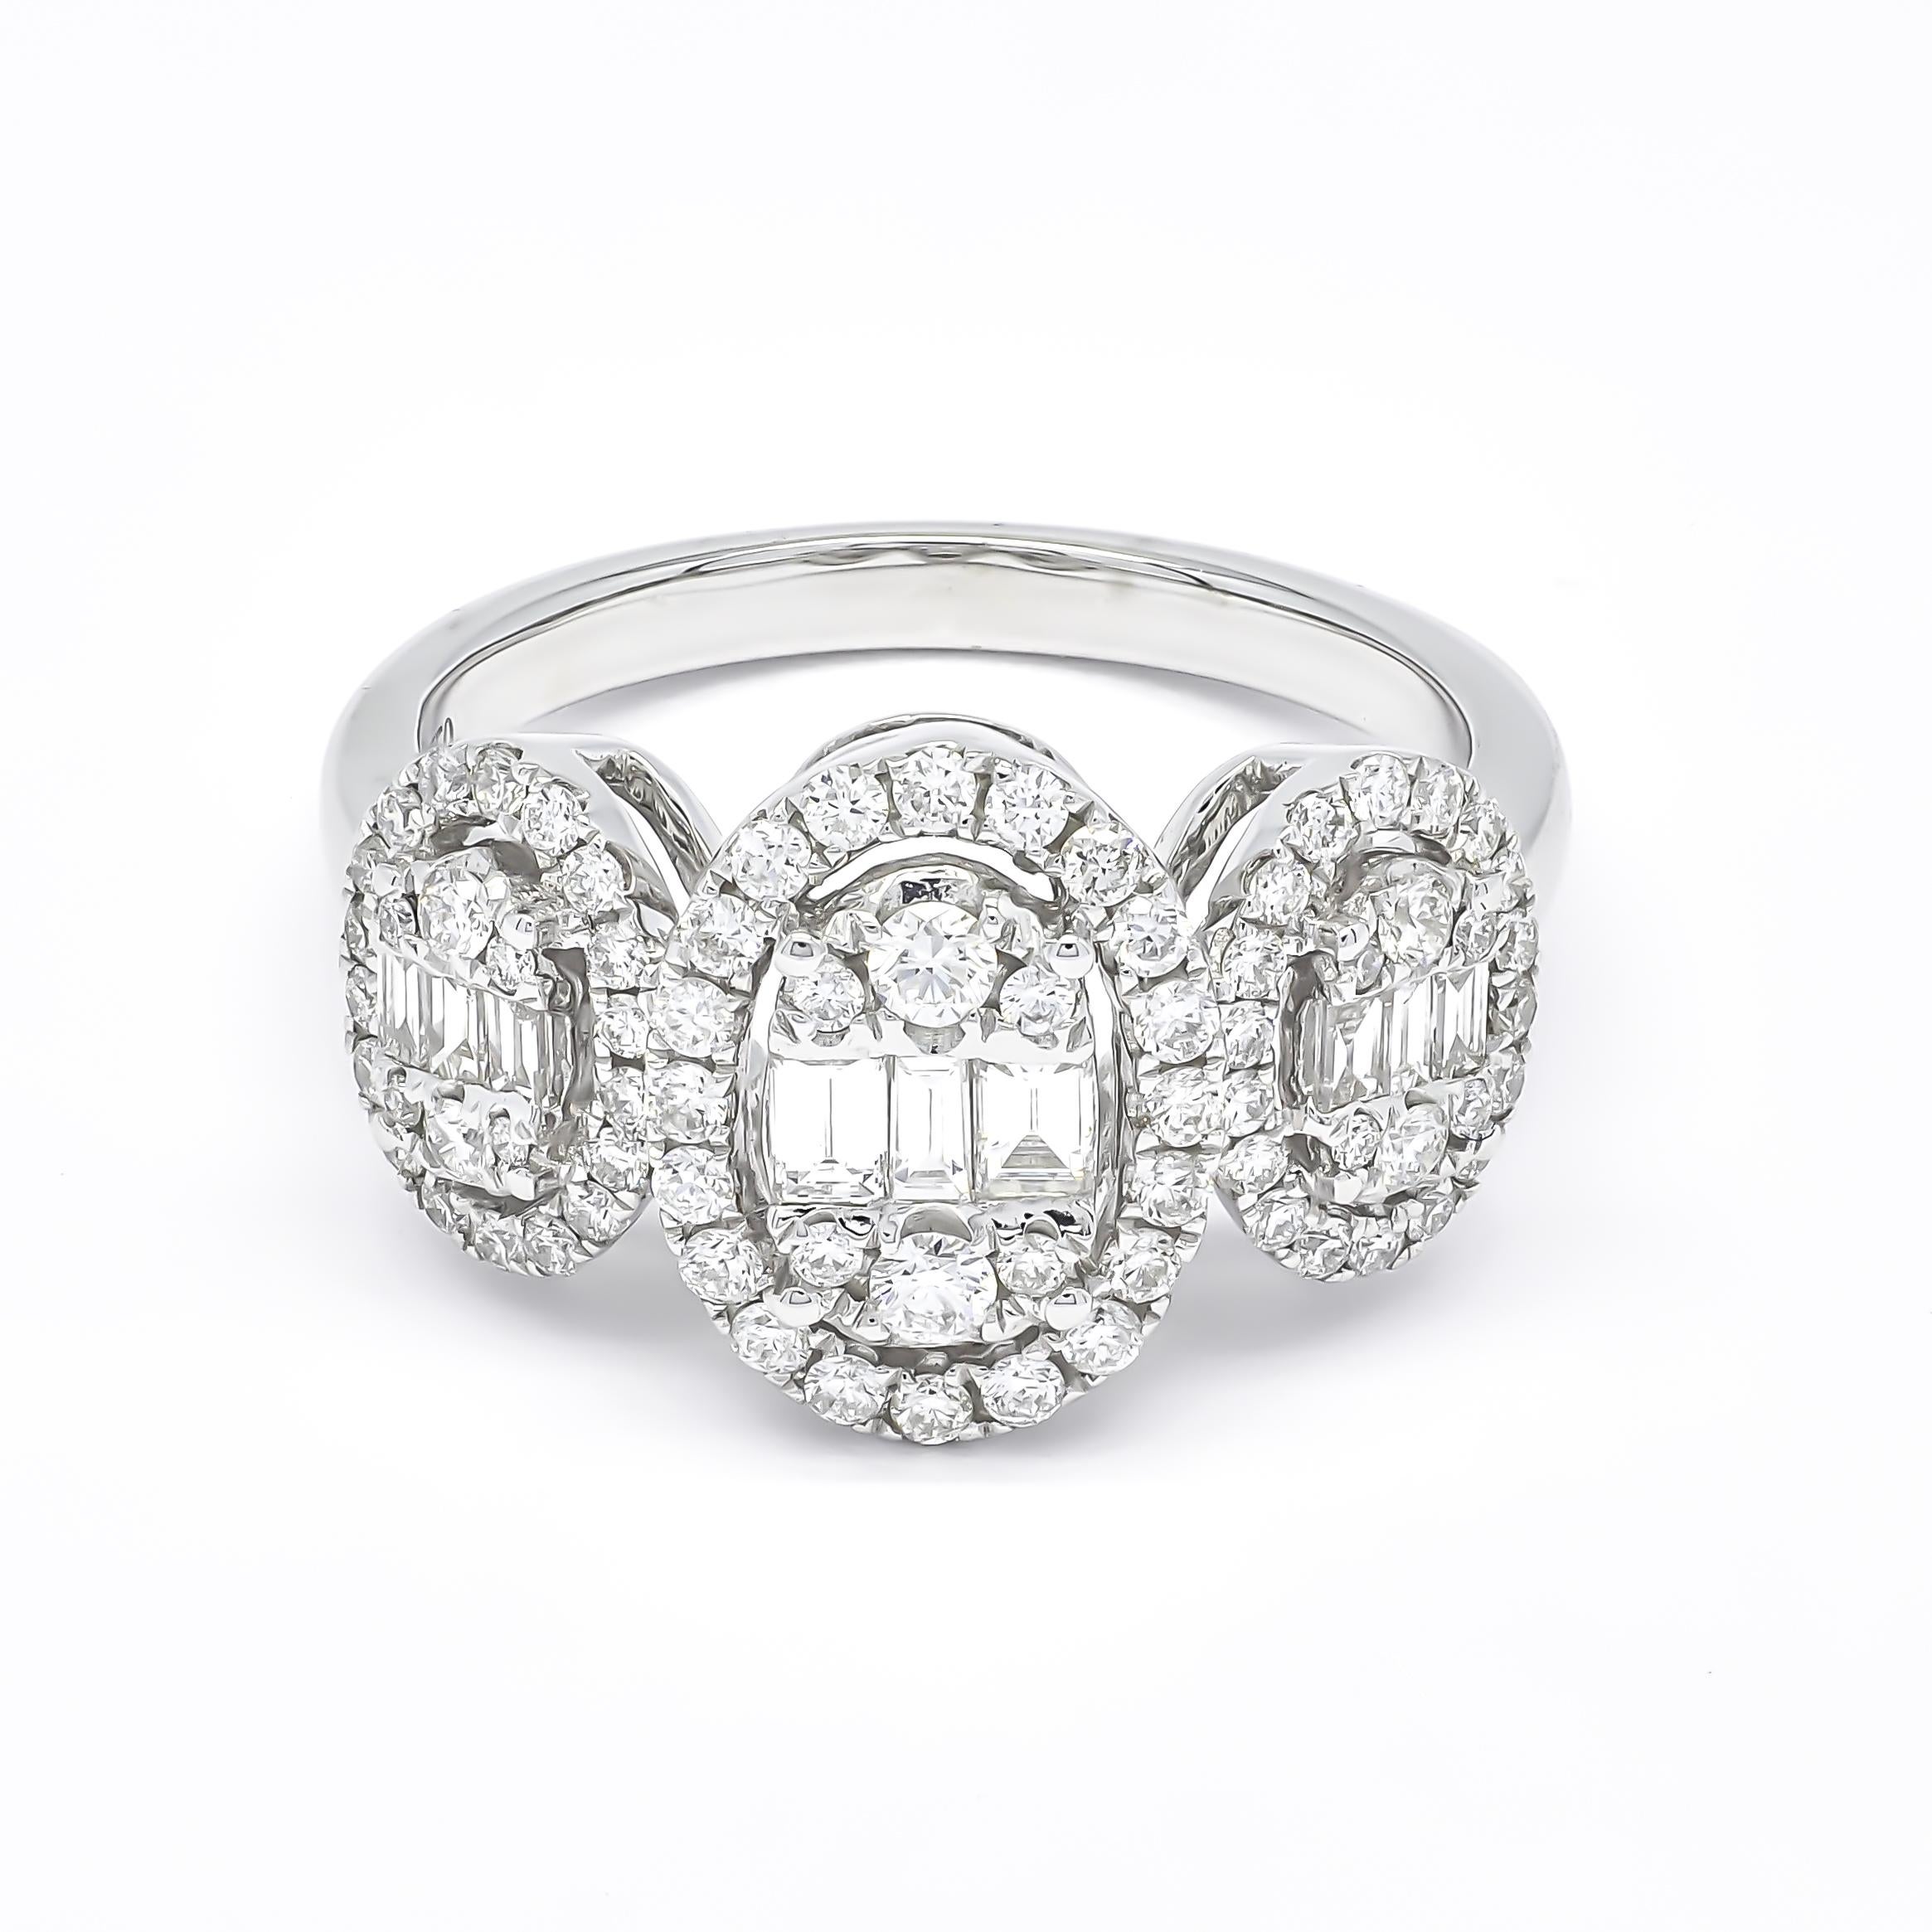 For Sale:  18KT White Gold 3 Cluster Diamond Engagement Ring R61146, Statement Diamond Ring 6